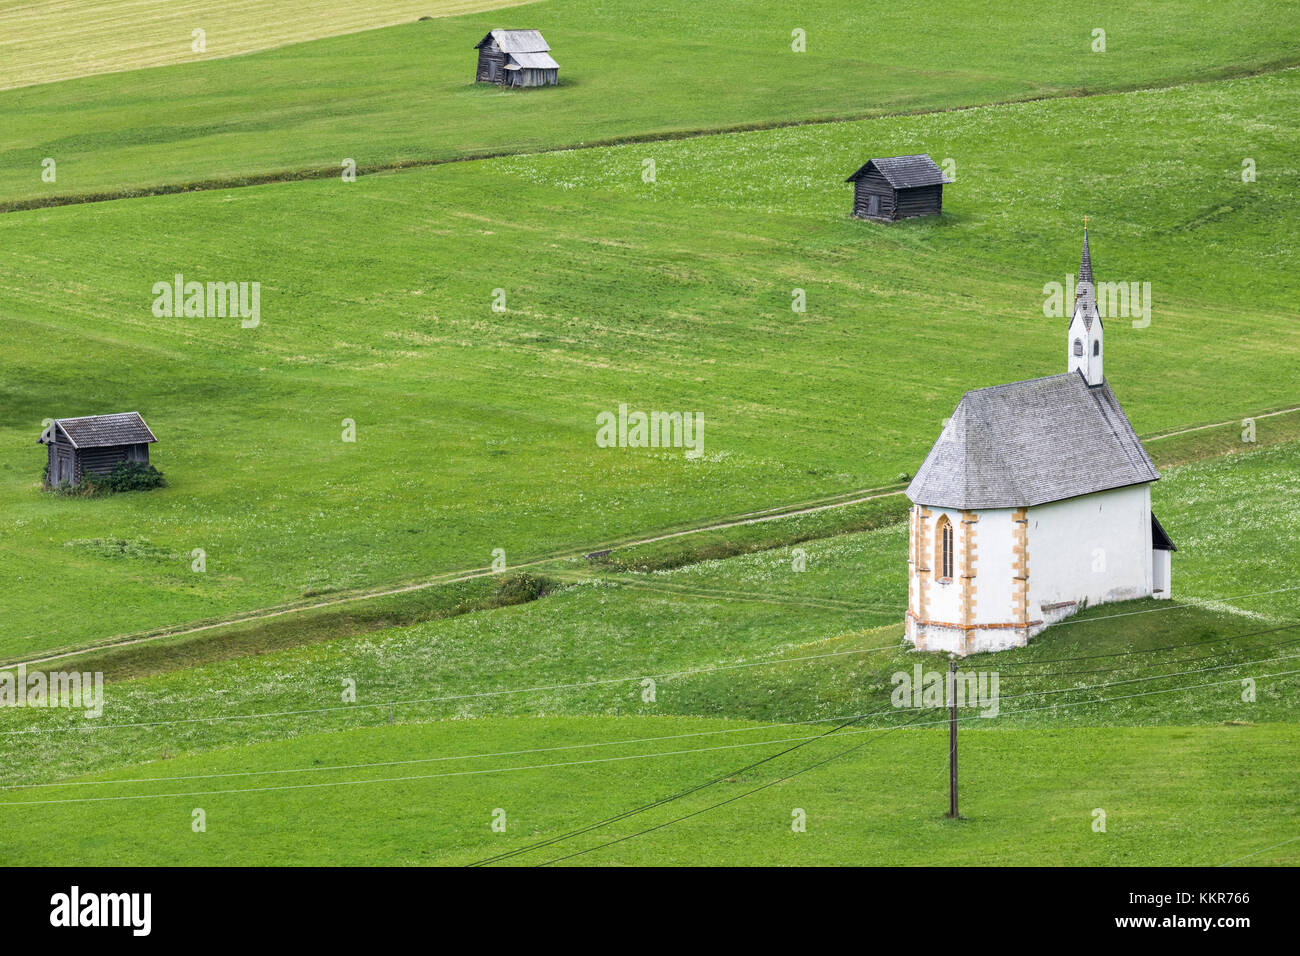 Characteristic barns in perfectly groomed lawns, Obertilliach, Tiroler Gailtal, East Tyrol, Tyrol, Austria Stock Photo